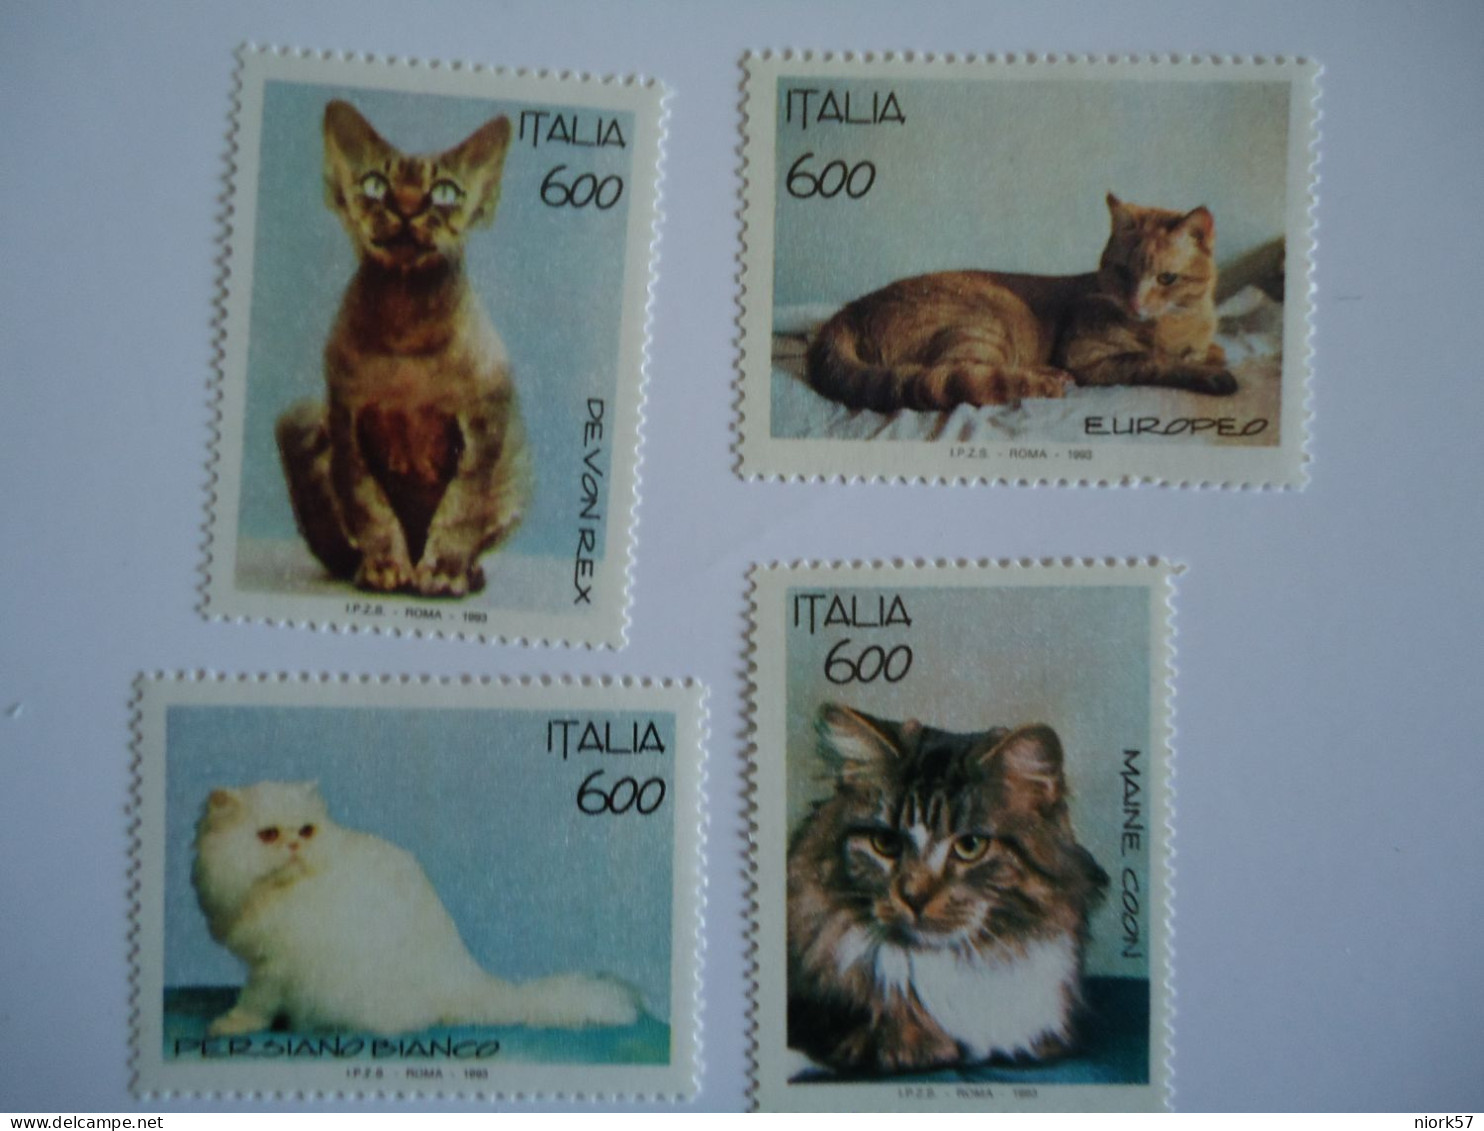 ITALY   MNH   4 STAMPS    ANIMALS  CAT CATS - Gatti